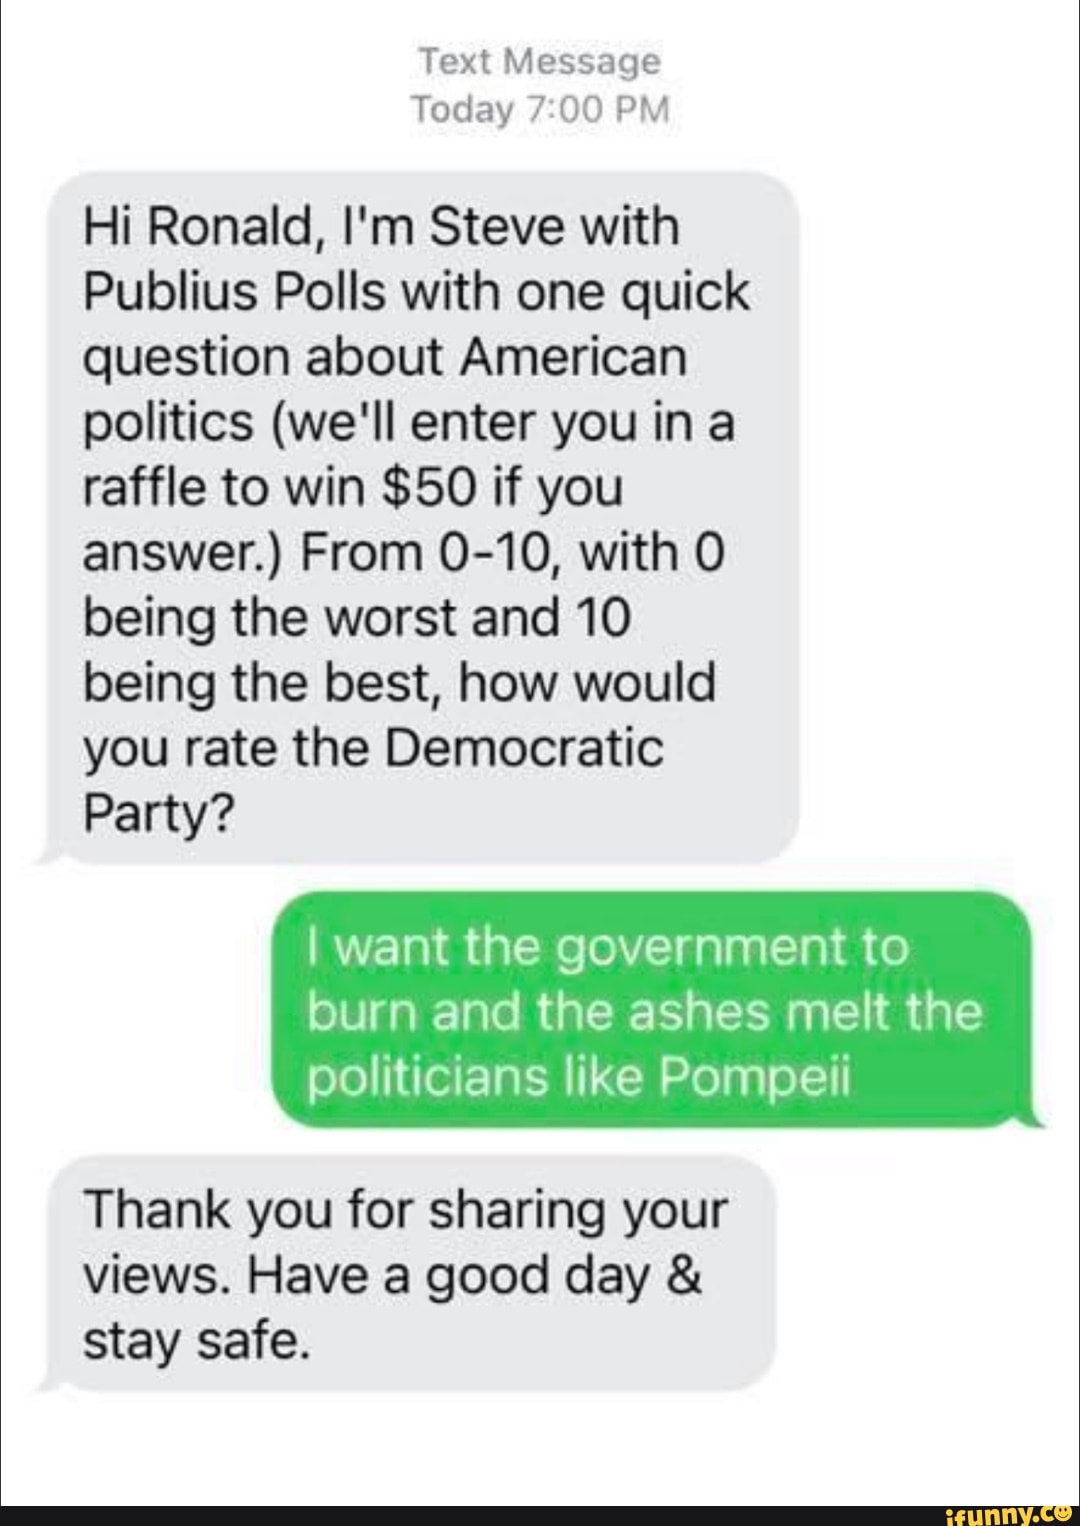 Text Message Today PM Hi Ronald, I'm Steve with Publius Polls with one